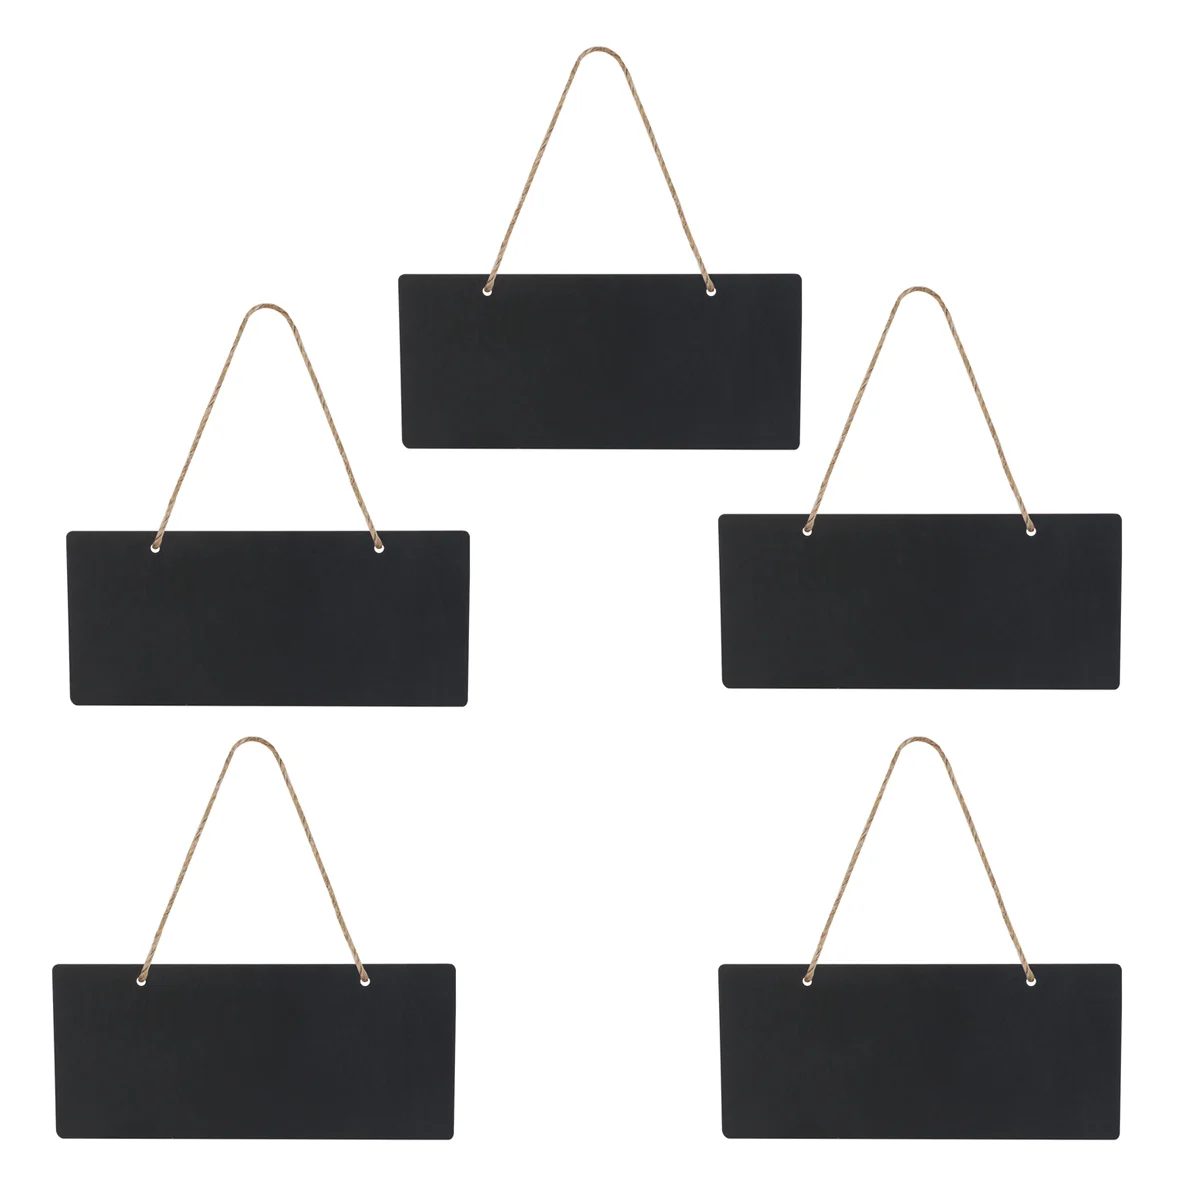 5pcs Black Chalkboard Tags Hanging Wooden Chalkboard Signs Decorative Display Board Small Resuable Wood Message Board Signs For